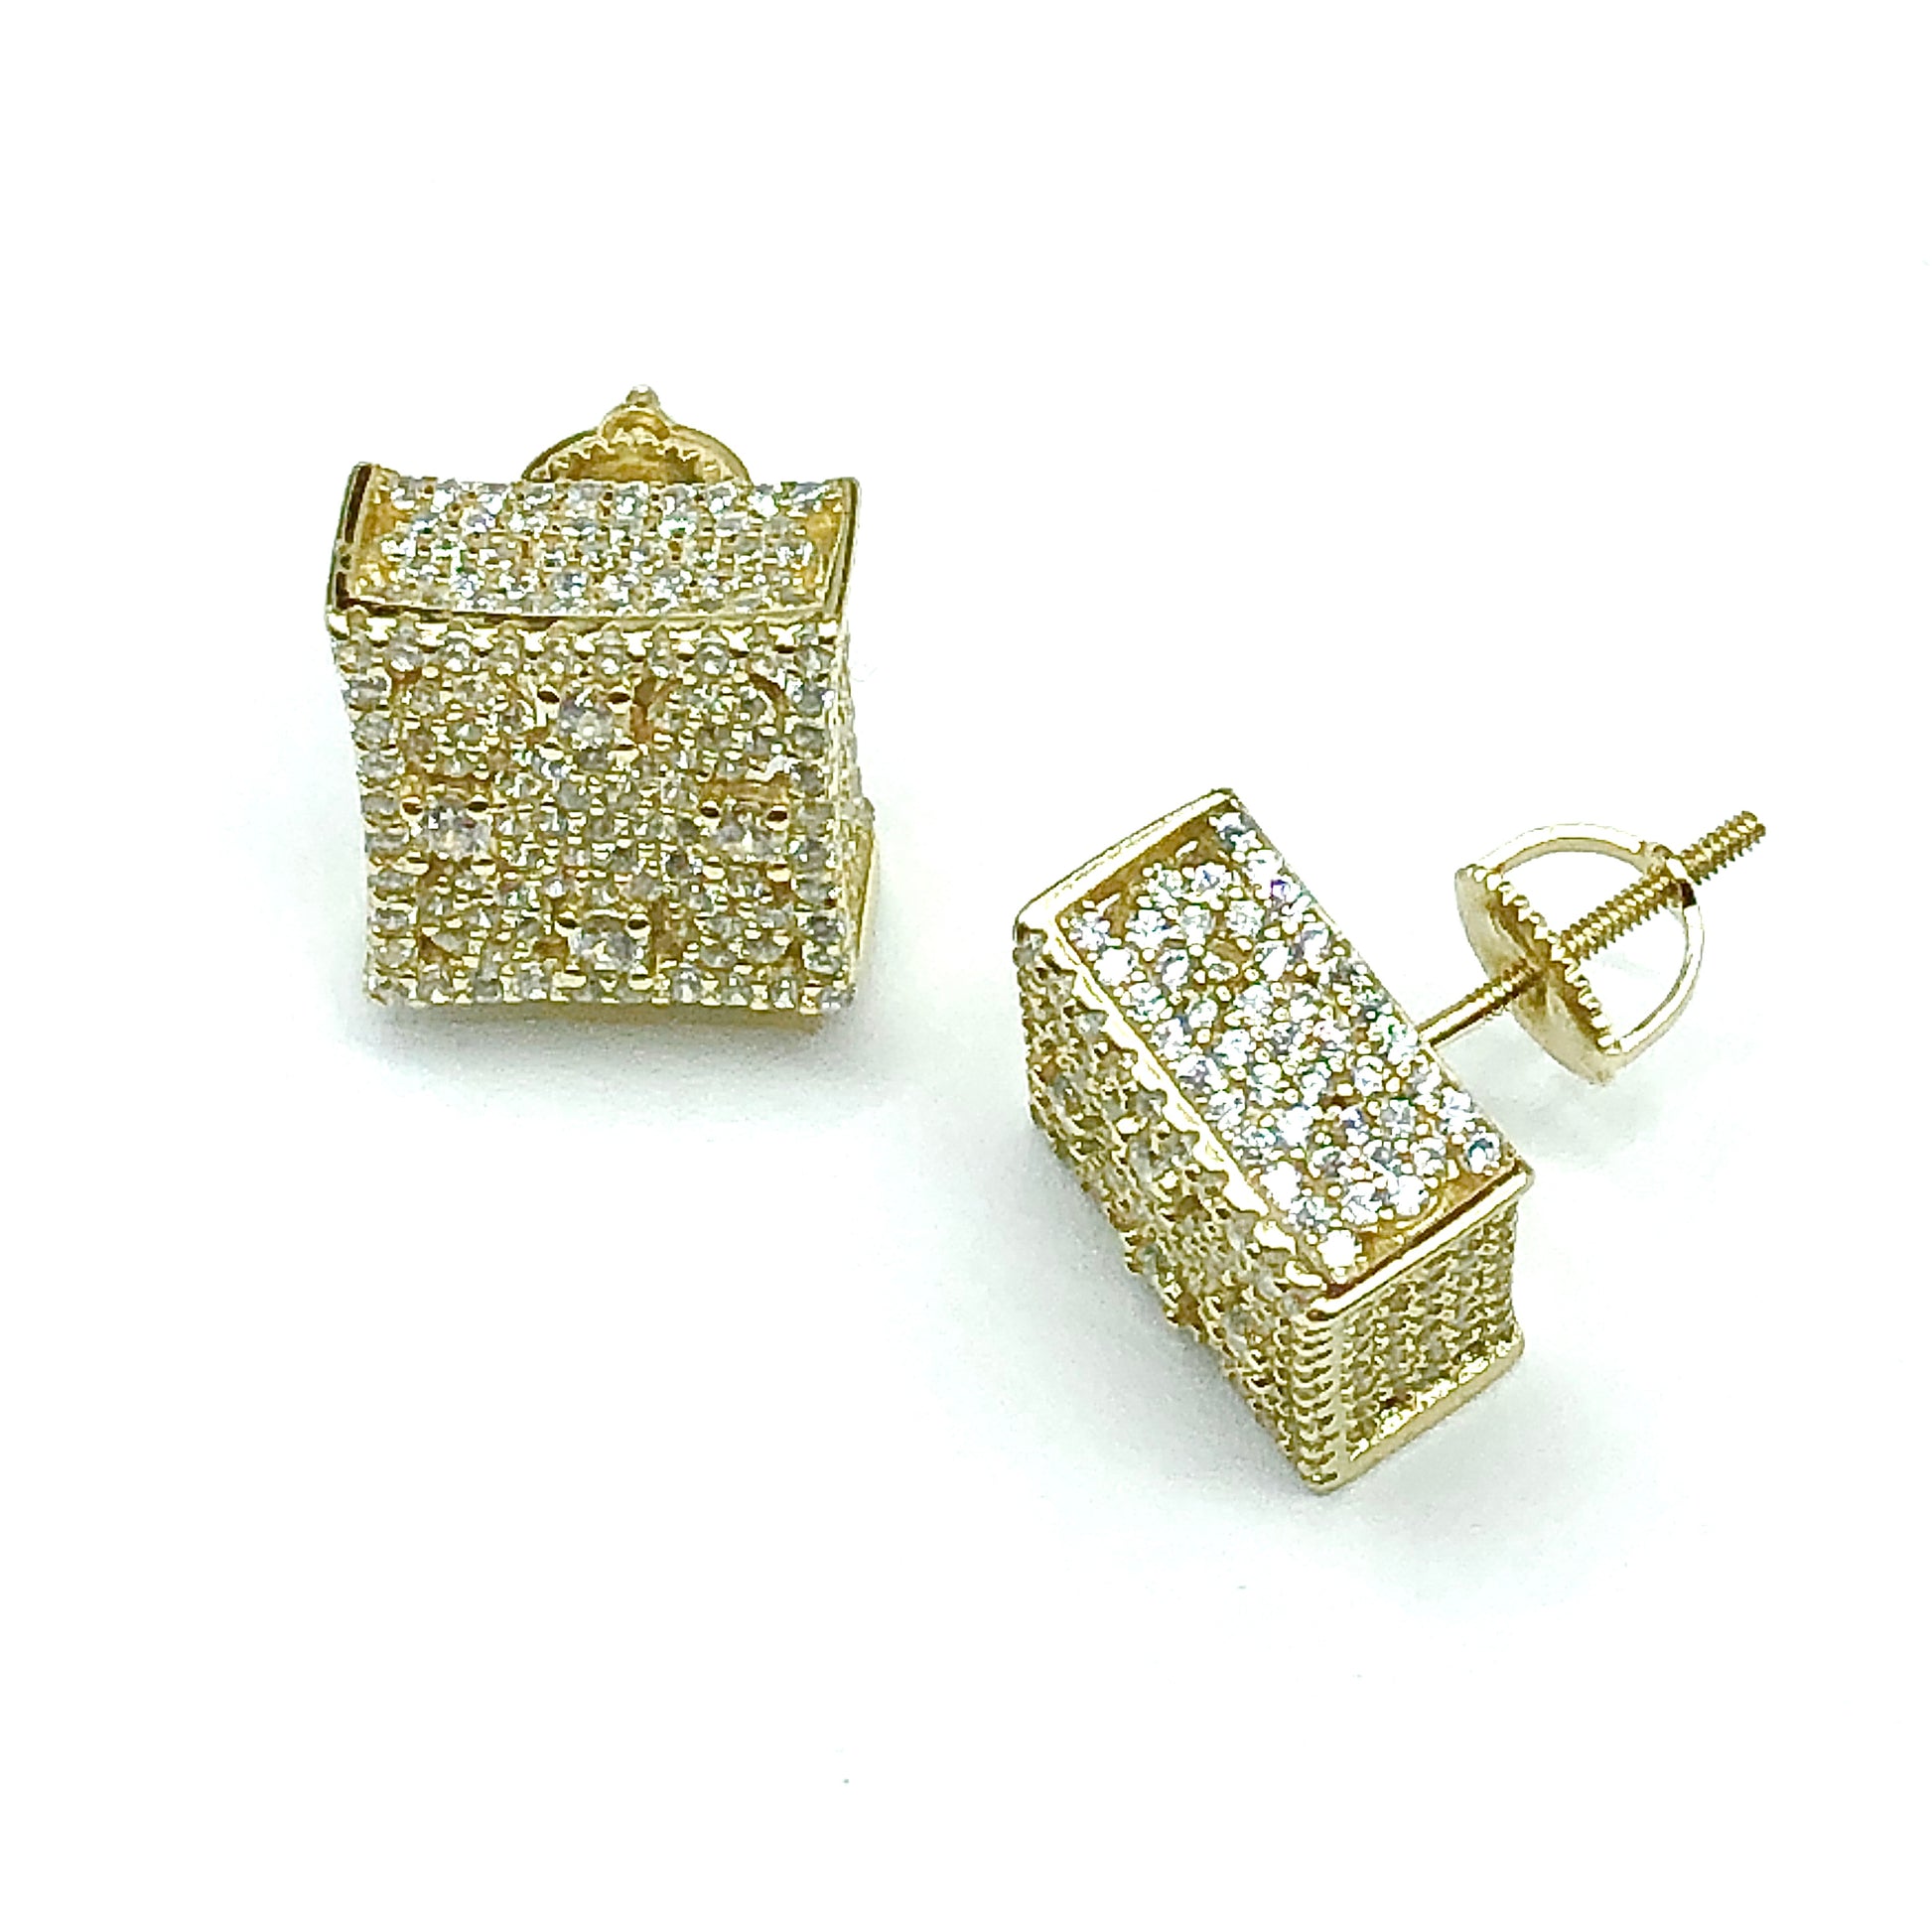 Blingschlingers Jewelry - Stud Earrings | Iced Out Cz Bold Sterling Silver Gold Square Earrings